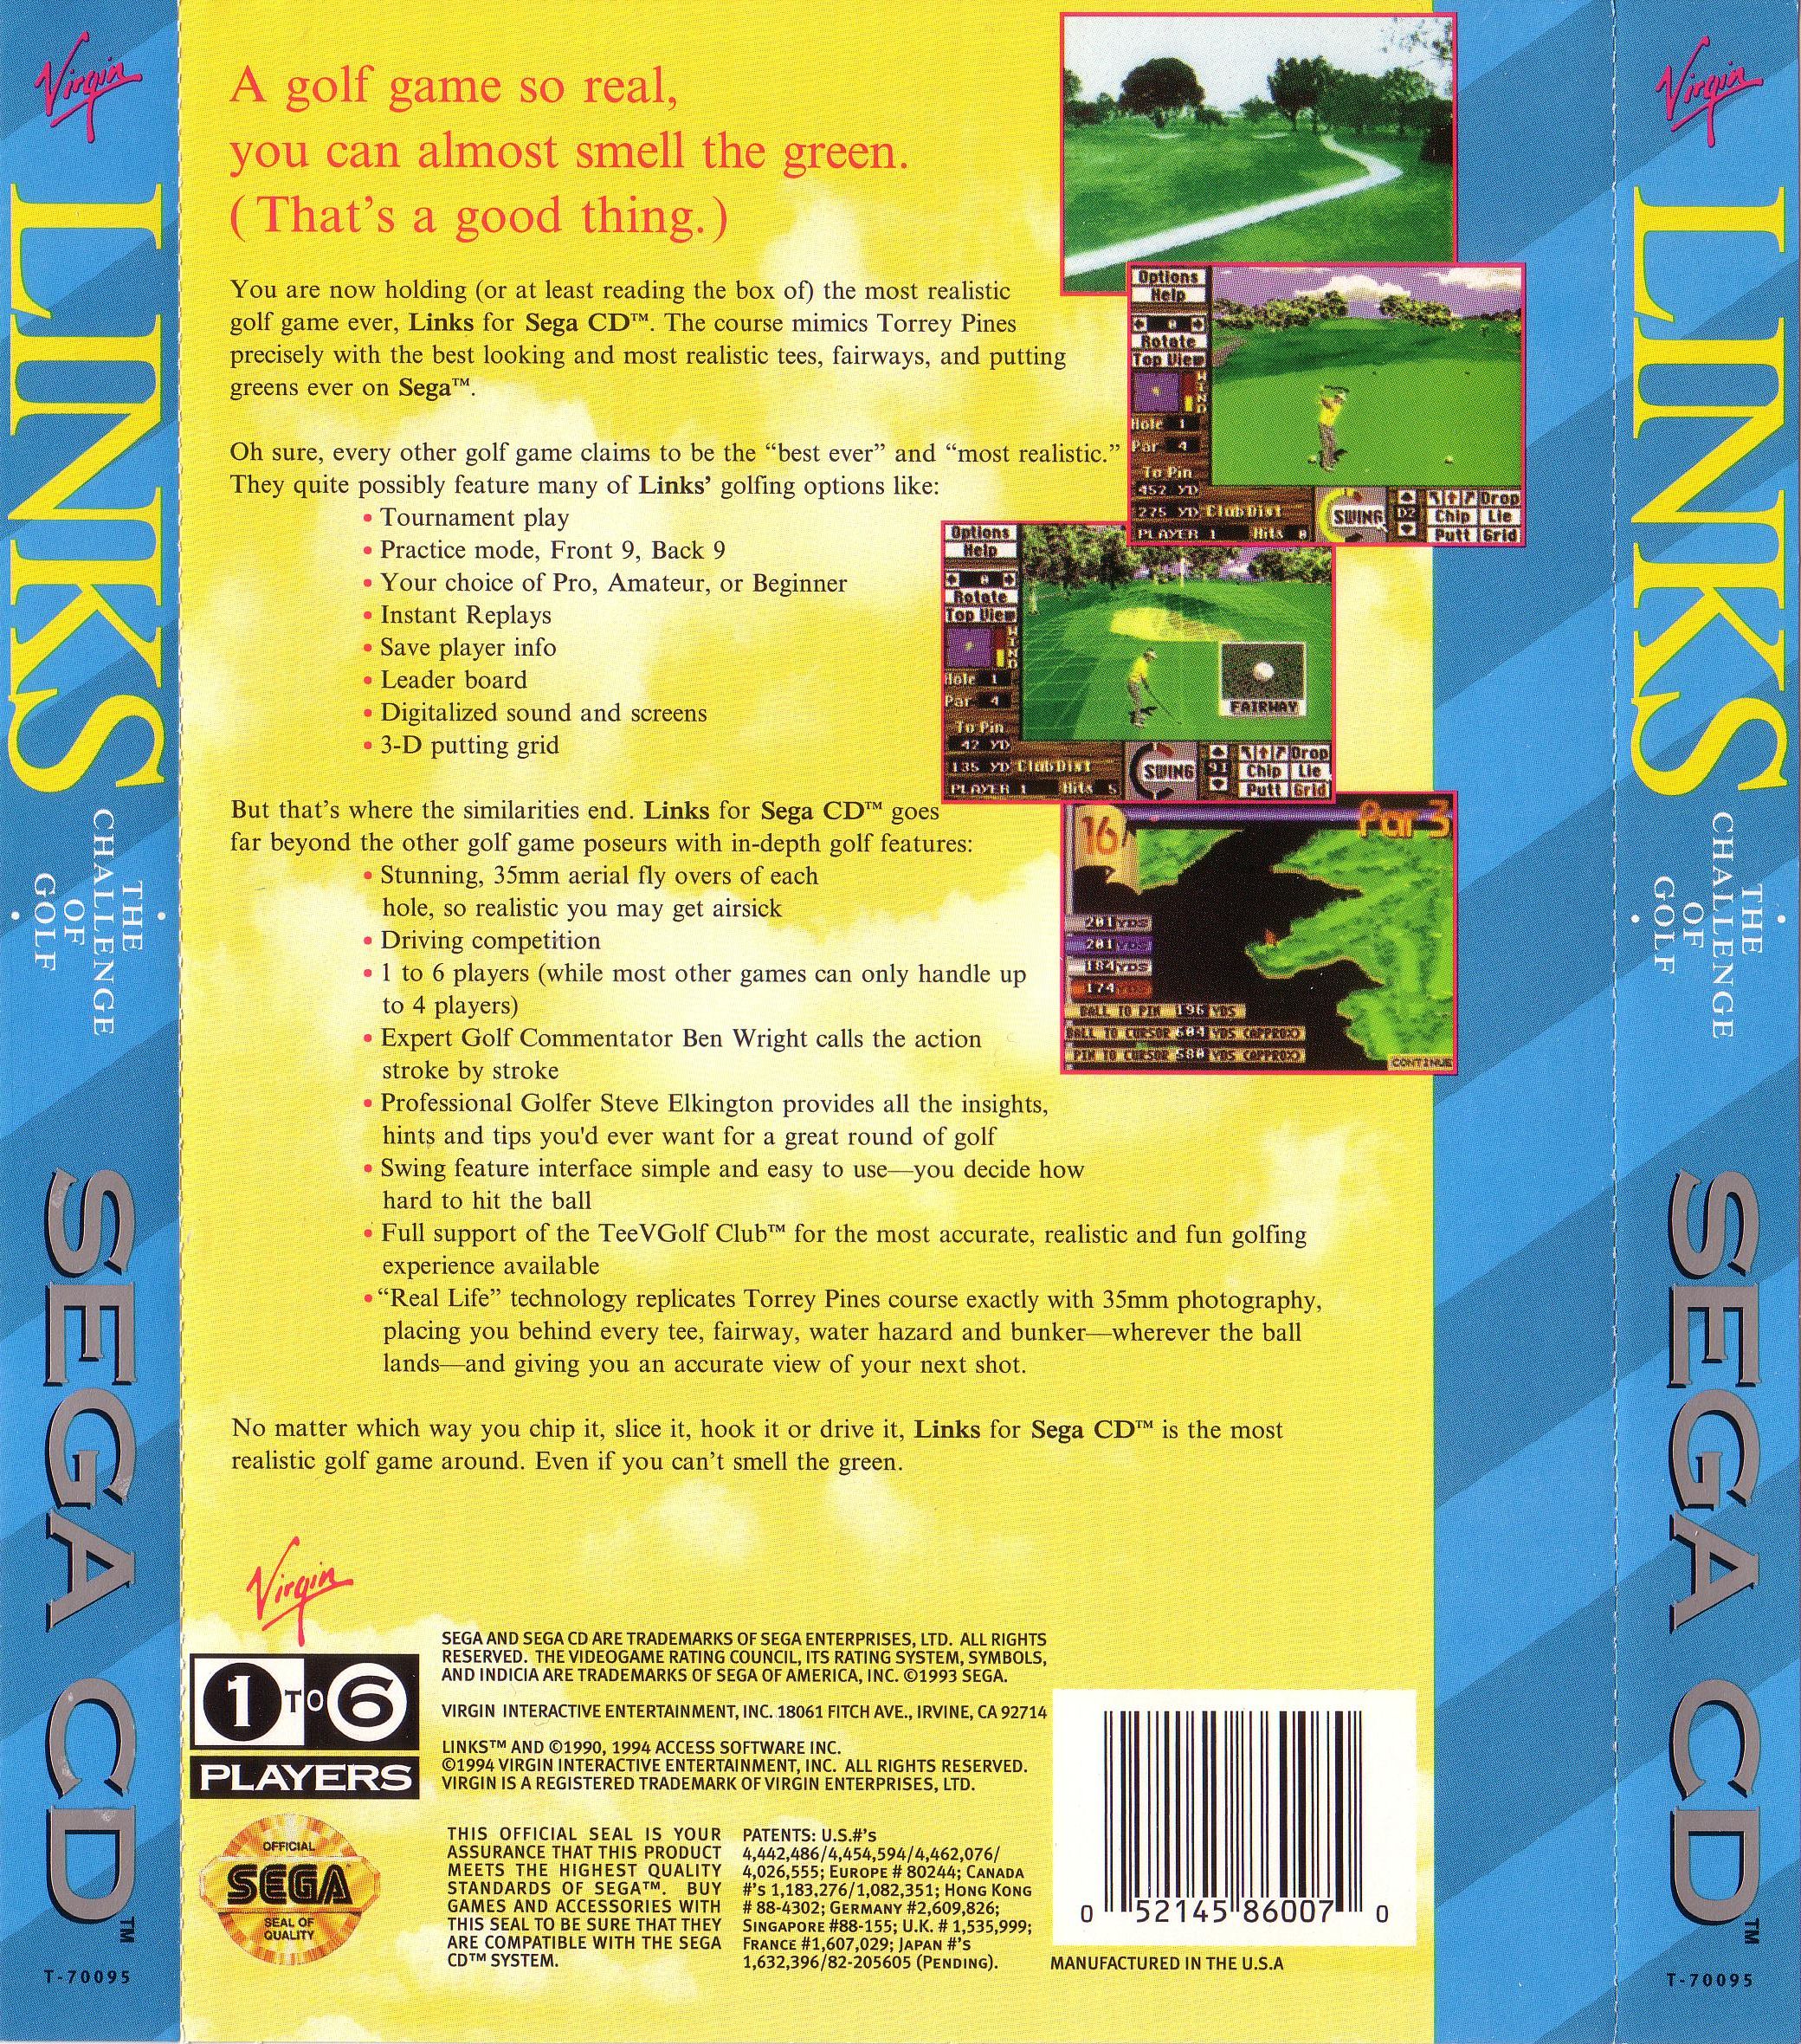 Links - The Challenge Of Golf (U) Back Cover